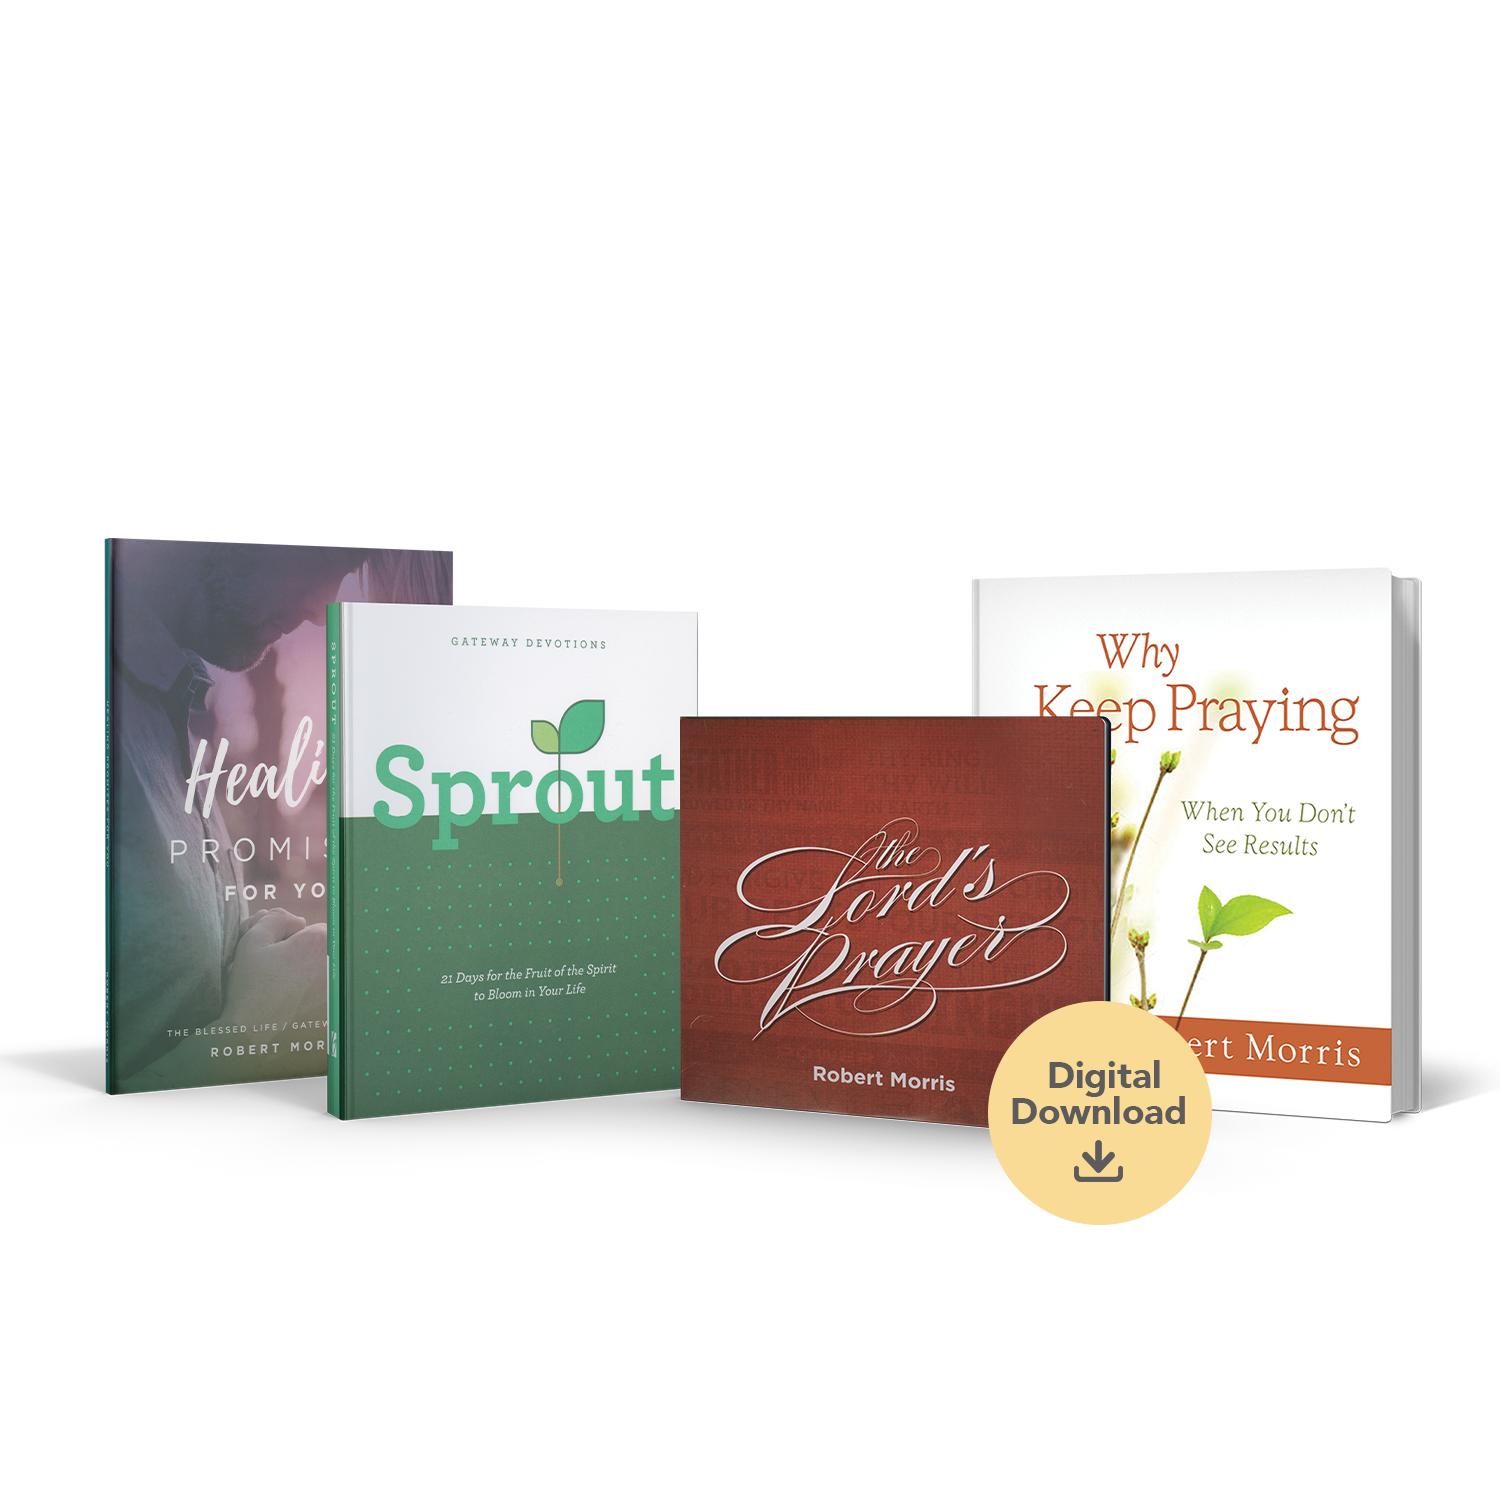 The Lord's Prayer Bundle with Digital Download